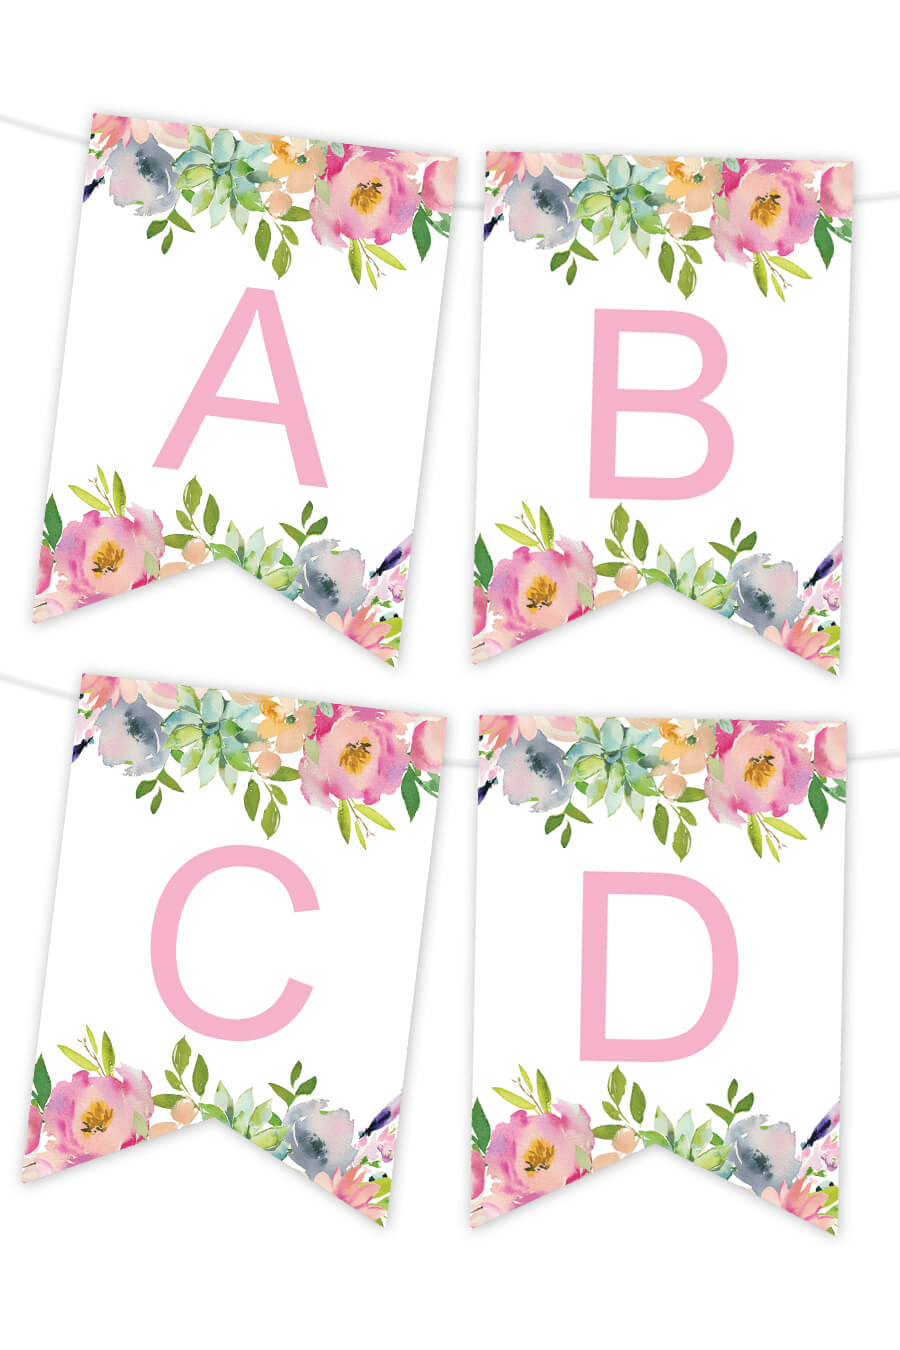 Printable Banners – Make Your Own Banners With Our Printable Within Diy Birthday Banner Template